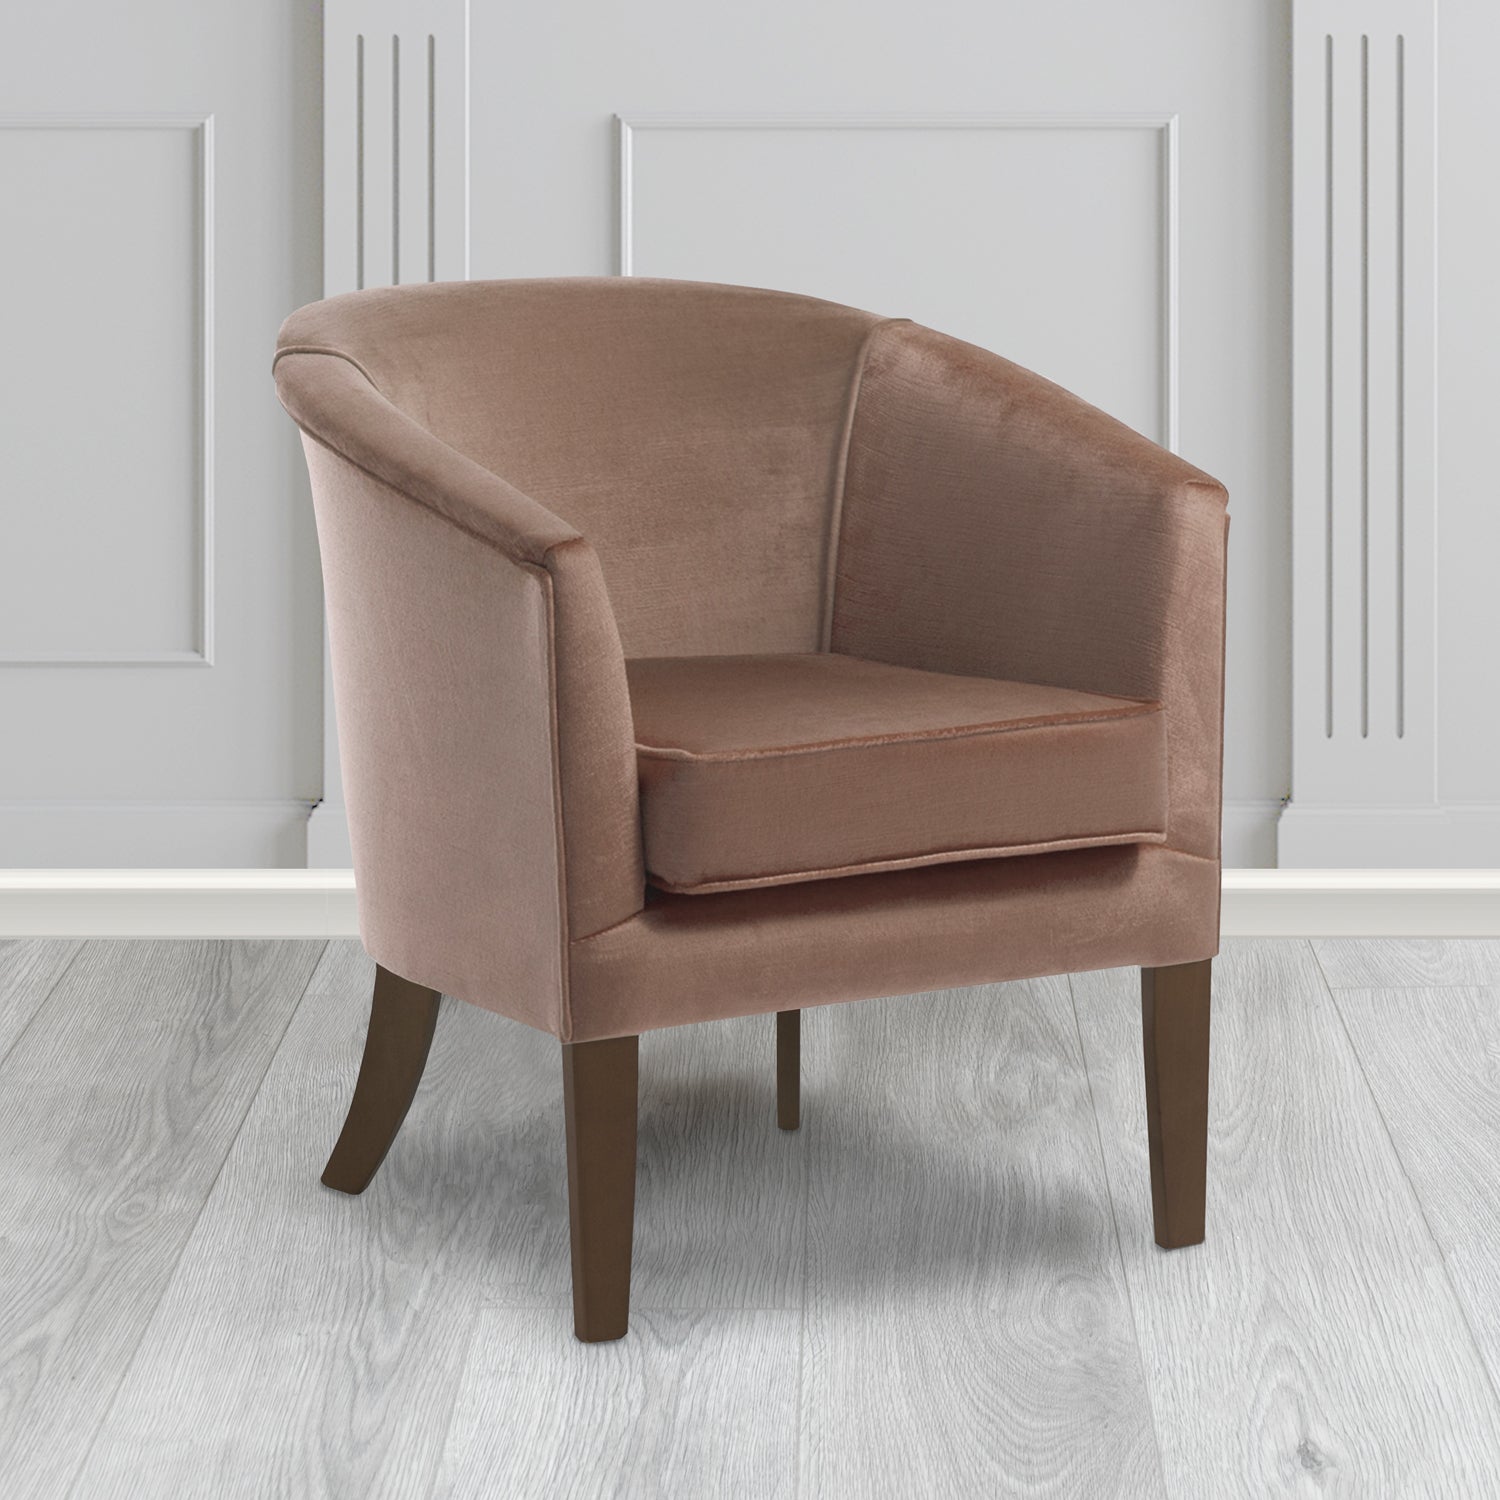 Jazz Tub Chair in Noble 708 Truffle Crib 5 Velvet Fabric - Water Resistant - The Tub Chair Shop